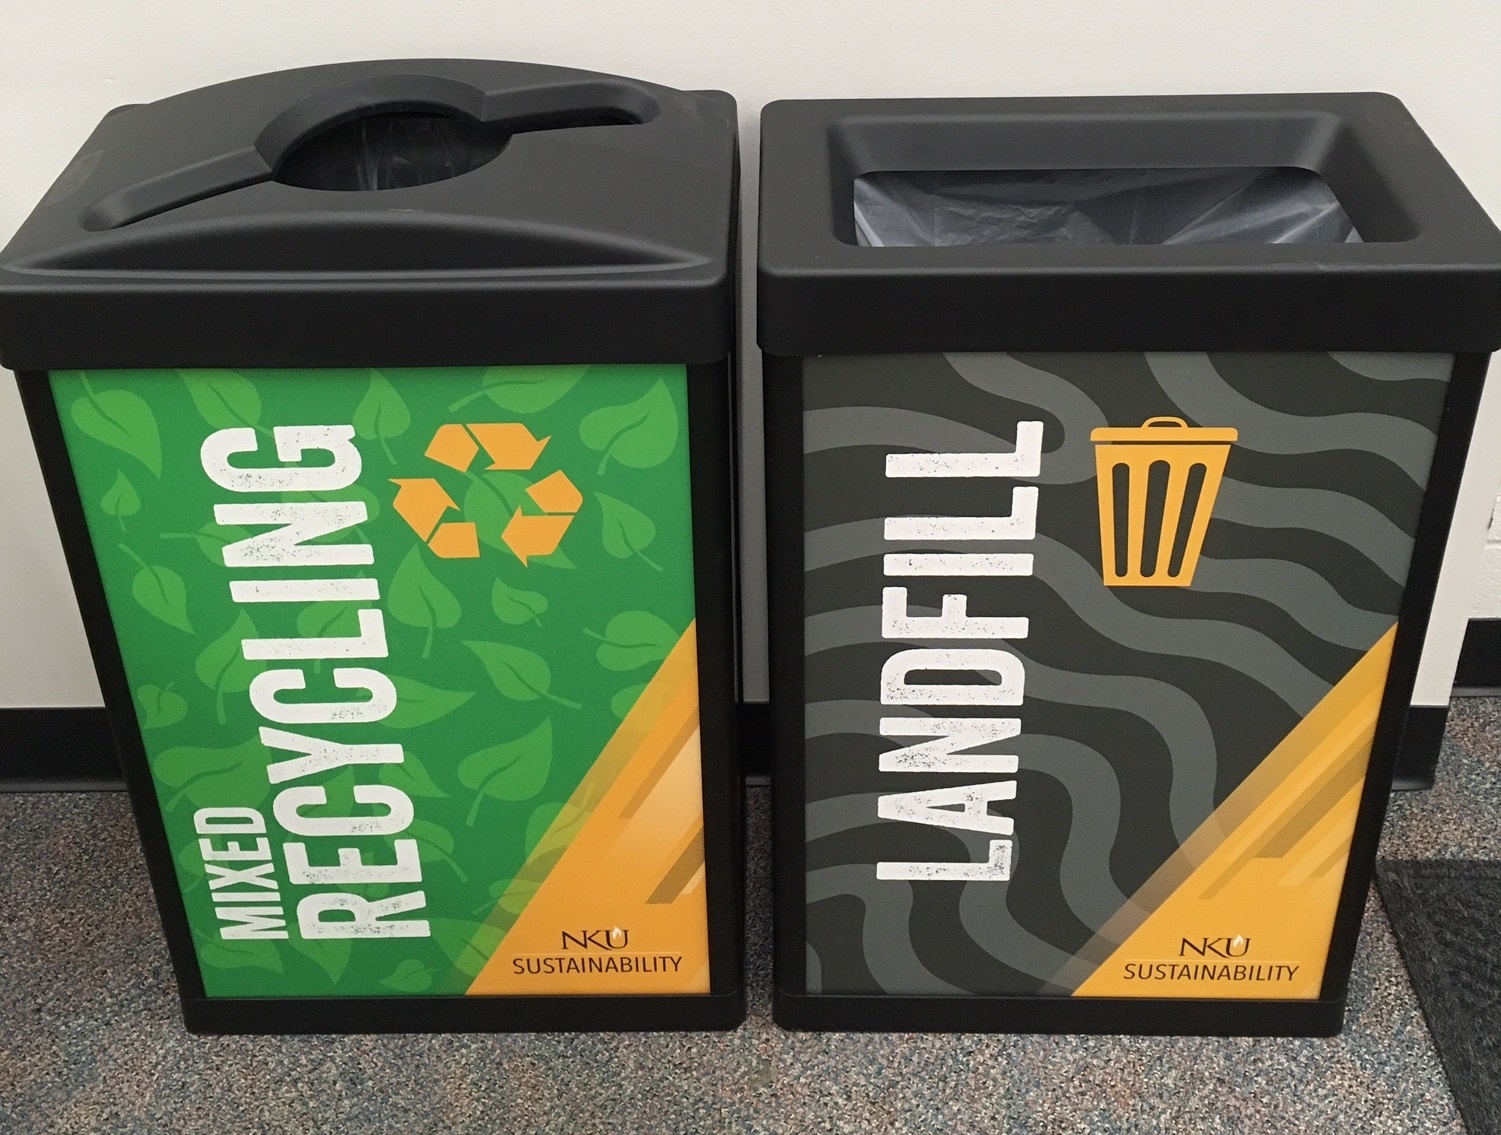 NKU's newly branded bins titled "mixed recycling" and "landfill"